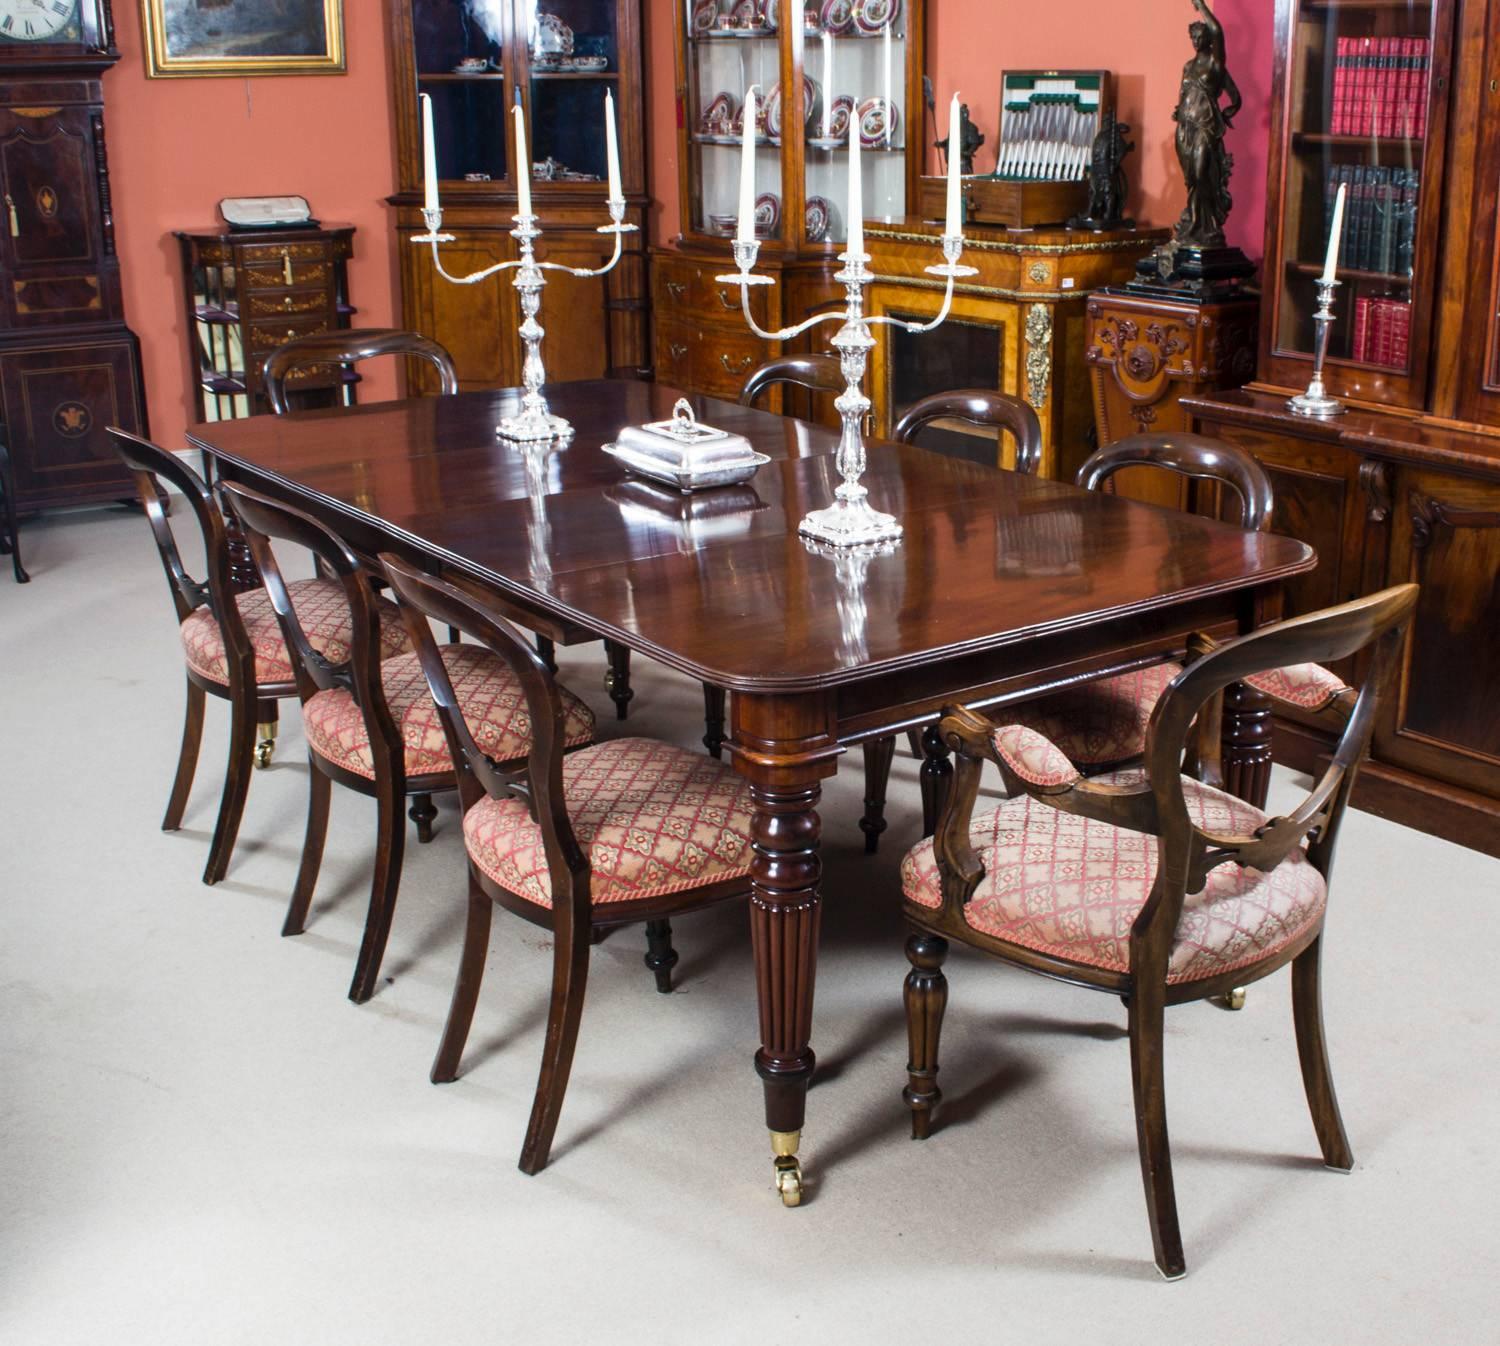 A very rare opportunity to own an antique English Regency dining room table in the manner of Gillows, Circa 1820 in date, with a set of eight vintage balloon back dining chairs. 

This amazing table has two original leaves, can sit eight people in